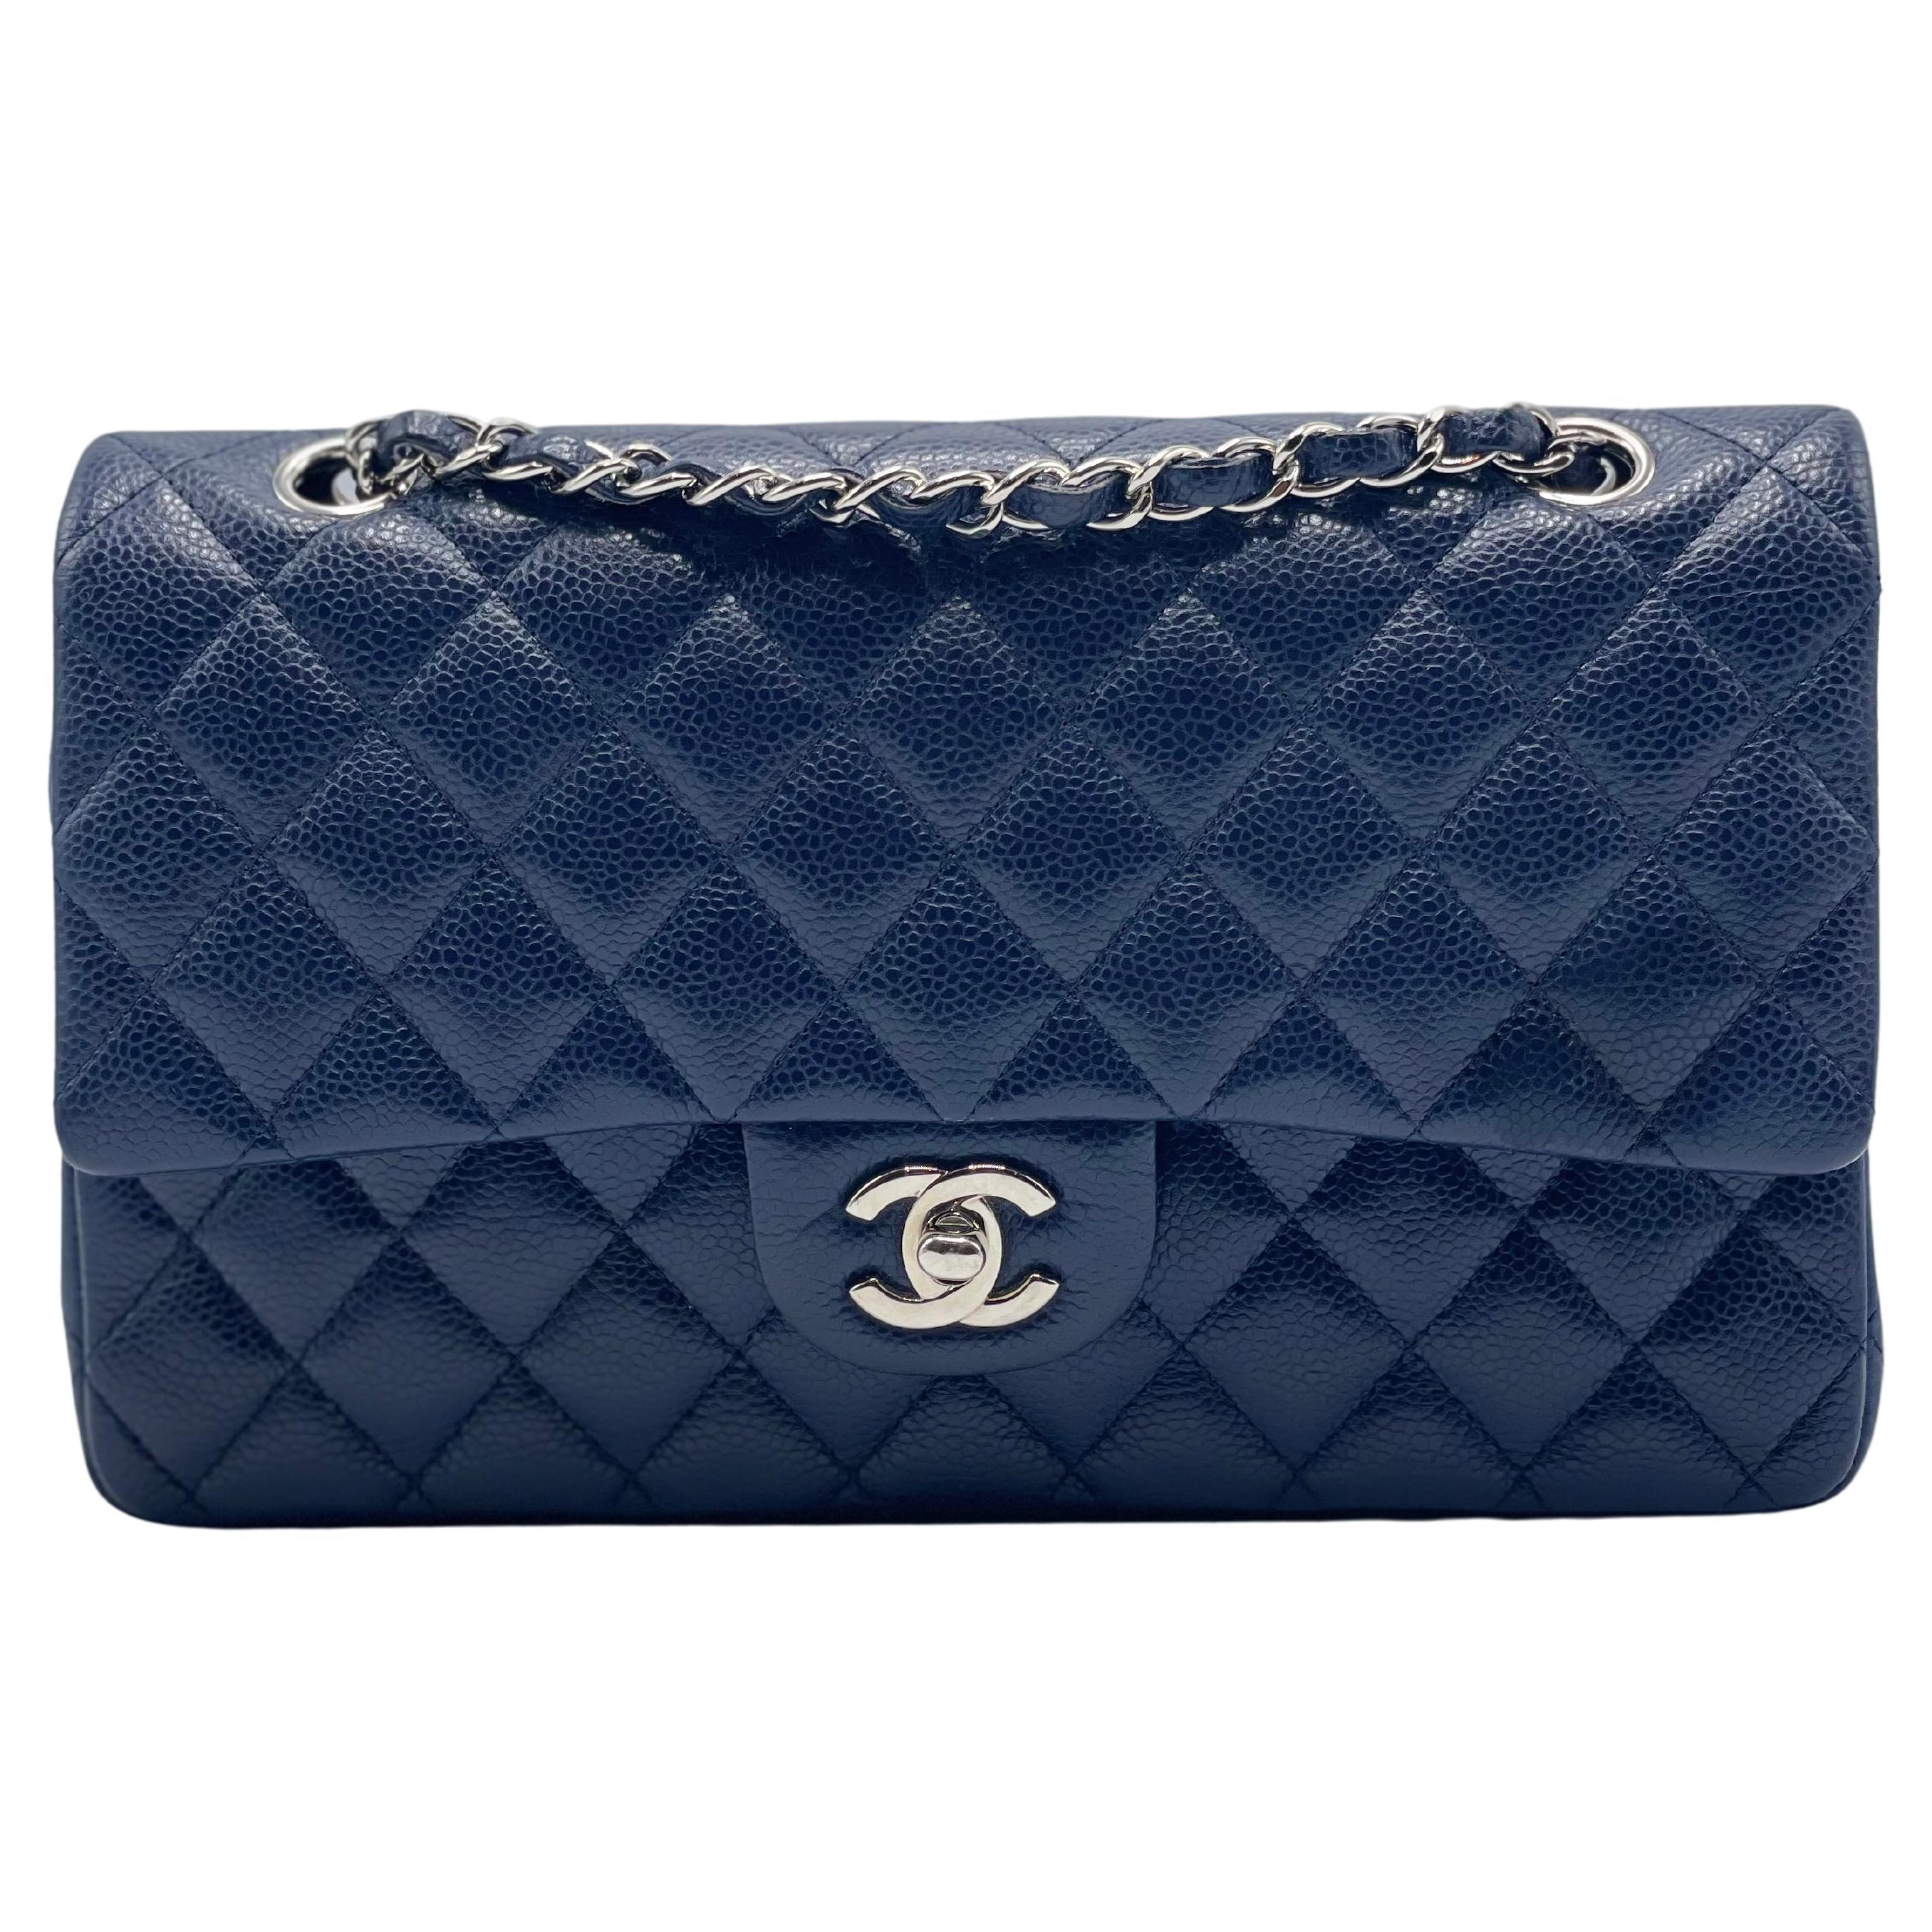 Chanel Quilted Bag Navy - 51 For Sale on 1stDibs  chanel quilted handbag,  navy quilted crossbody bag, chanel blue quilted bag